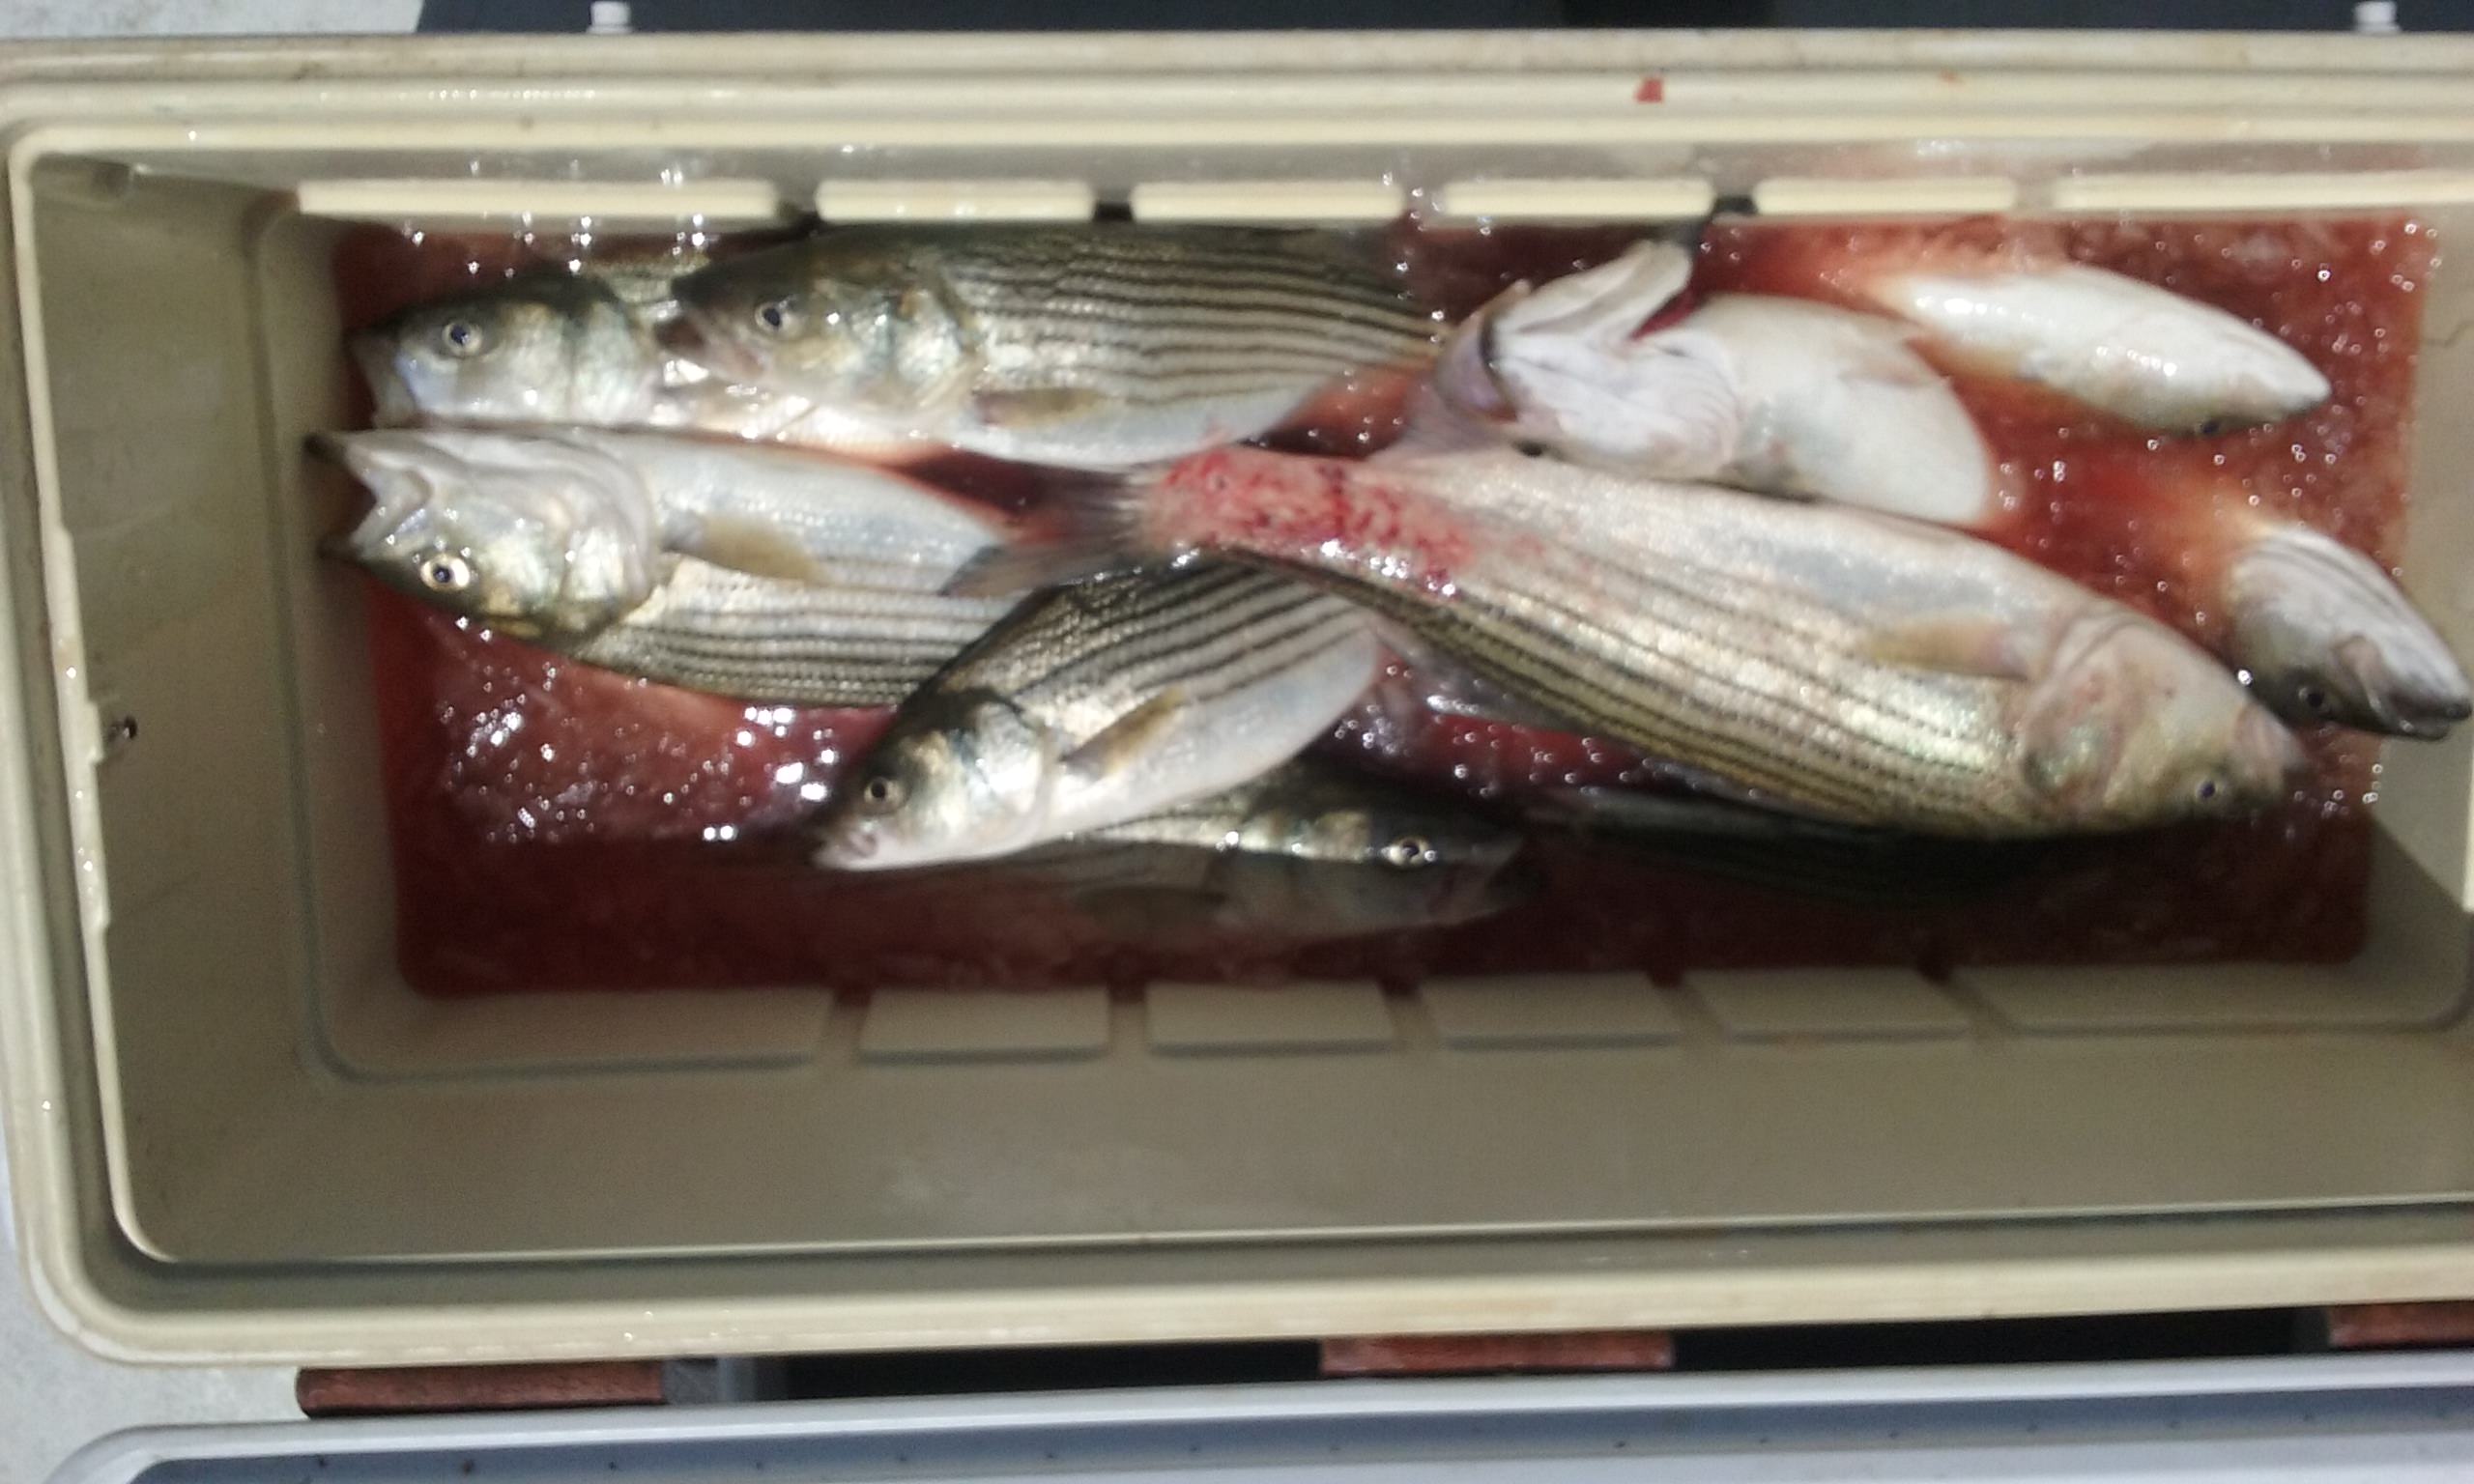 Another Cooler Full of Rockfish Caught in Maryland!